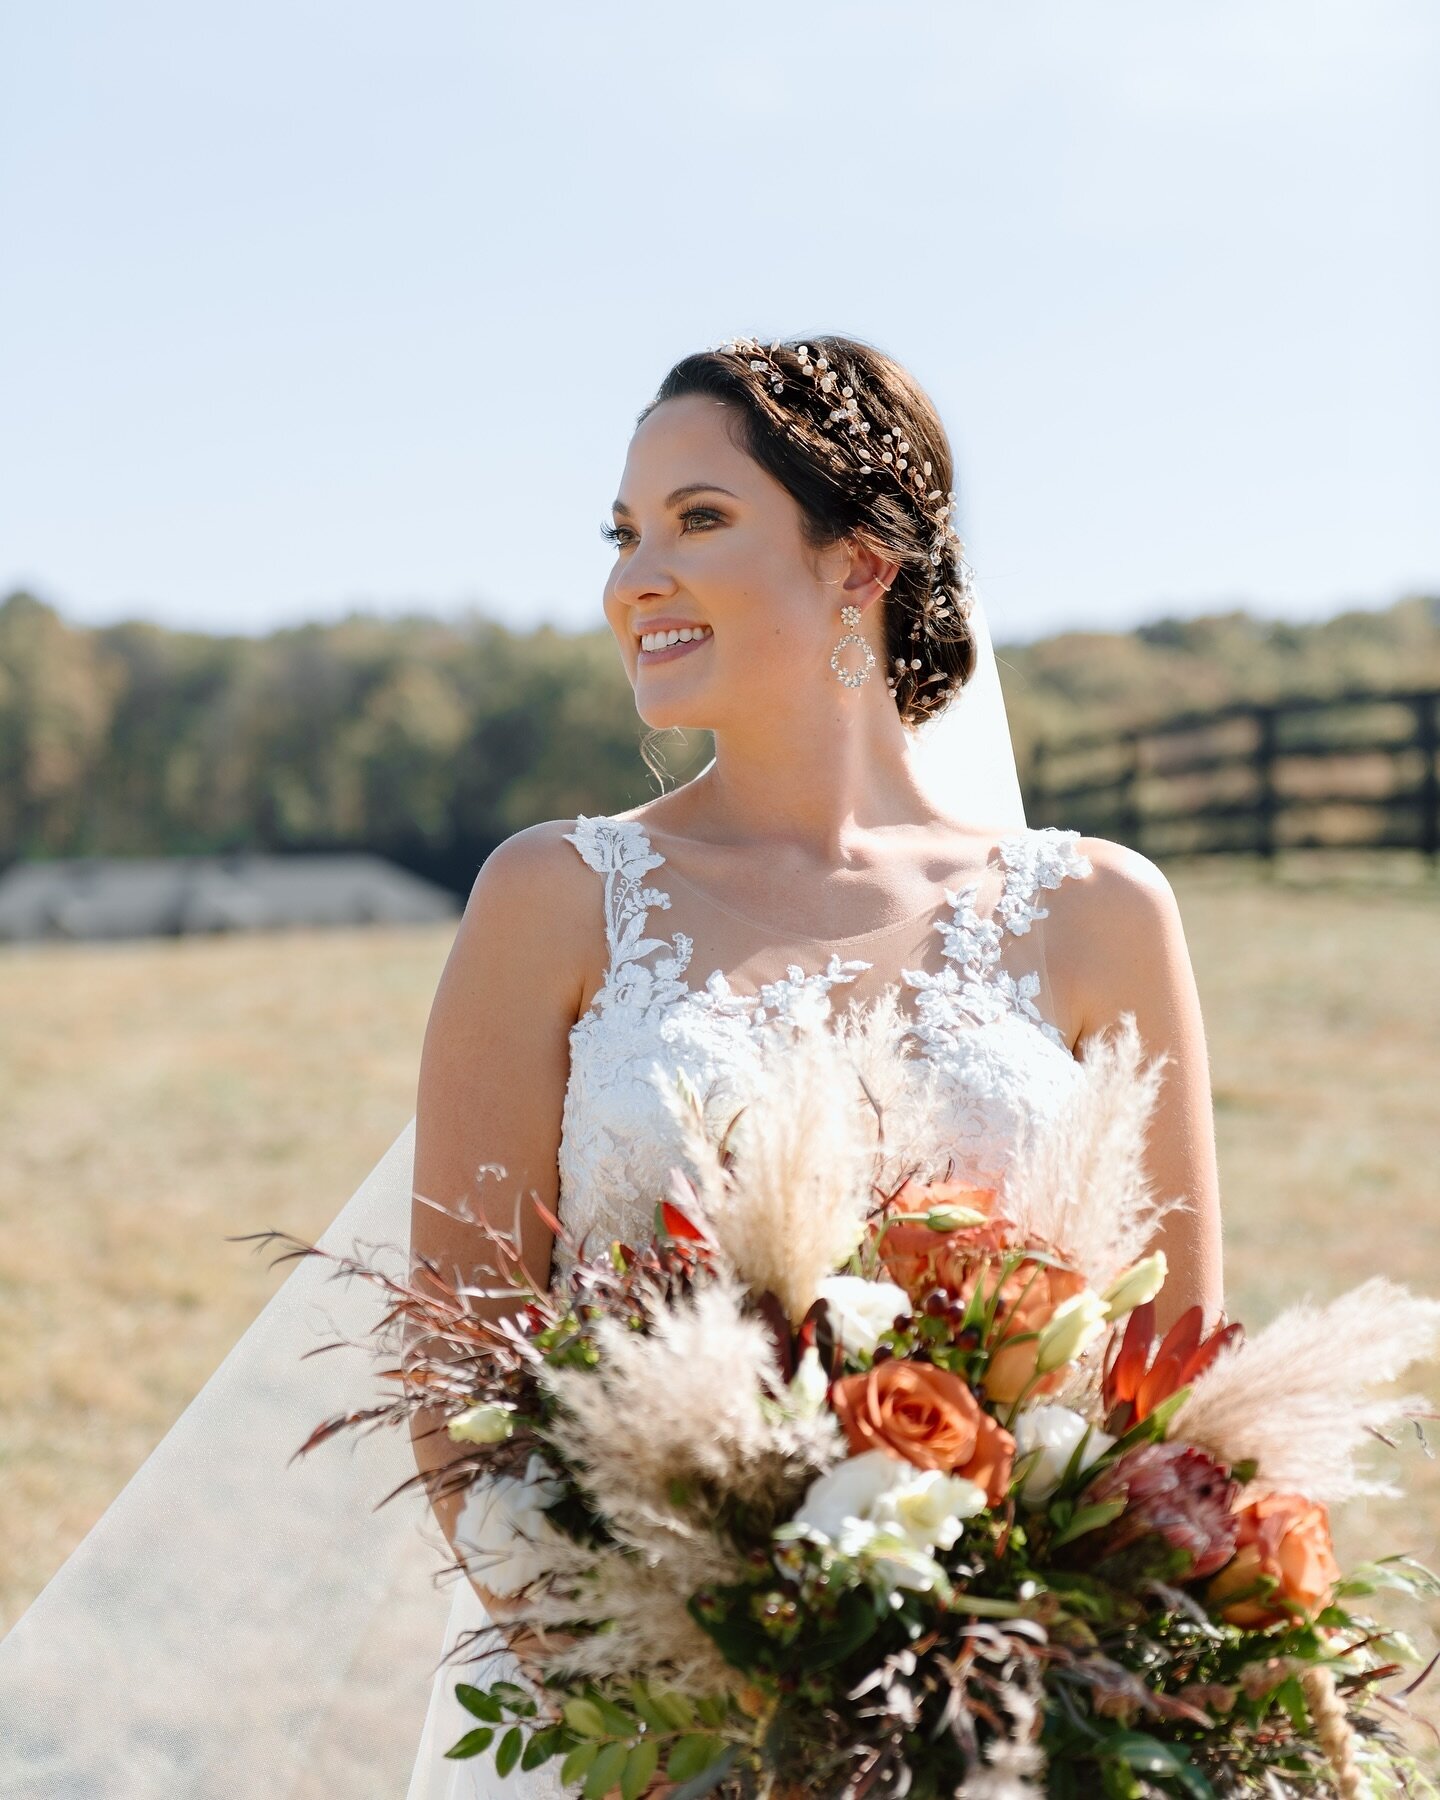 Let&rsquo;s chat about locations vs. timelines (and impact on edits)! 

This portrait features a bride in the bright sun (about 2pm) in an open field at her beautiful wedding venue before her ceremony. Vibrant colors and contrast remain fluid and rea